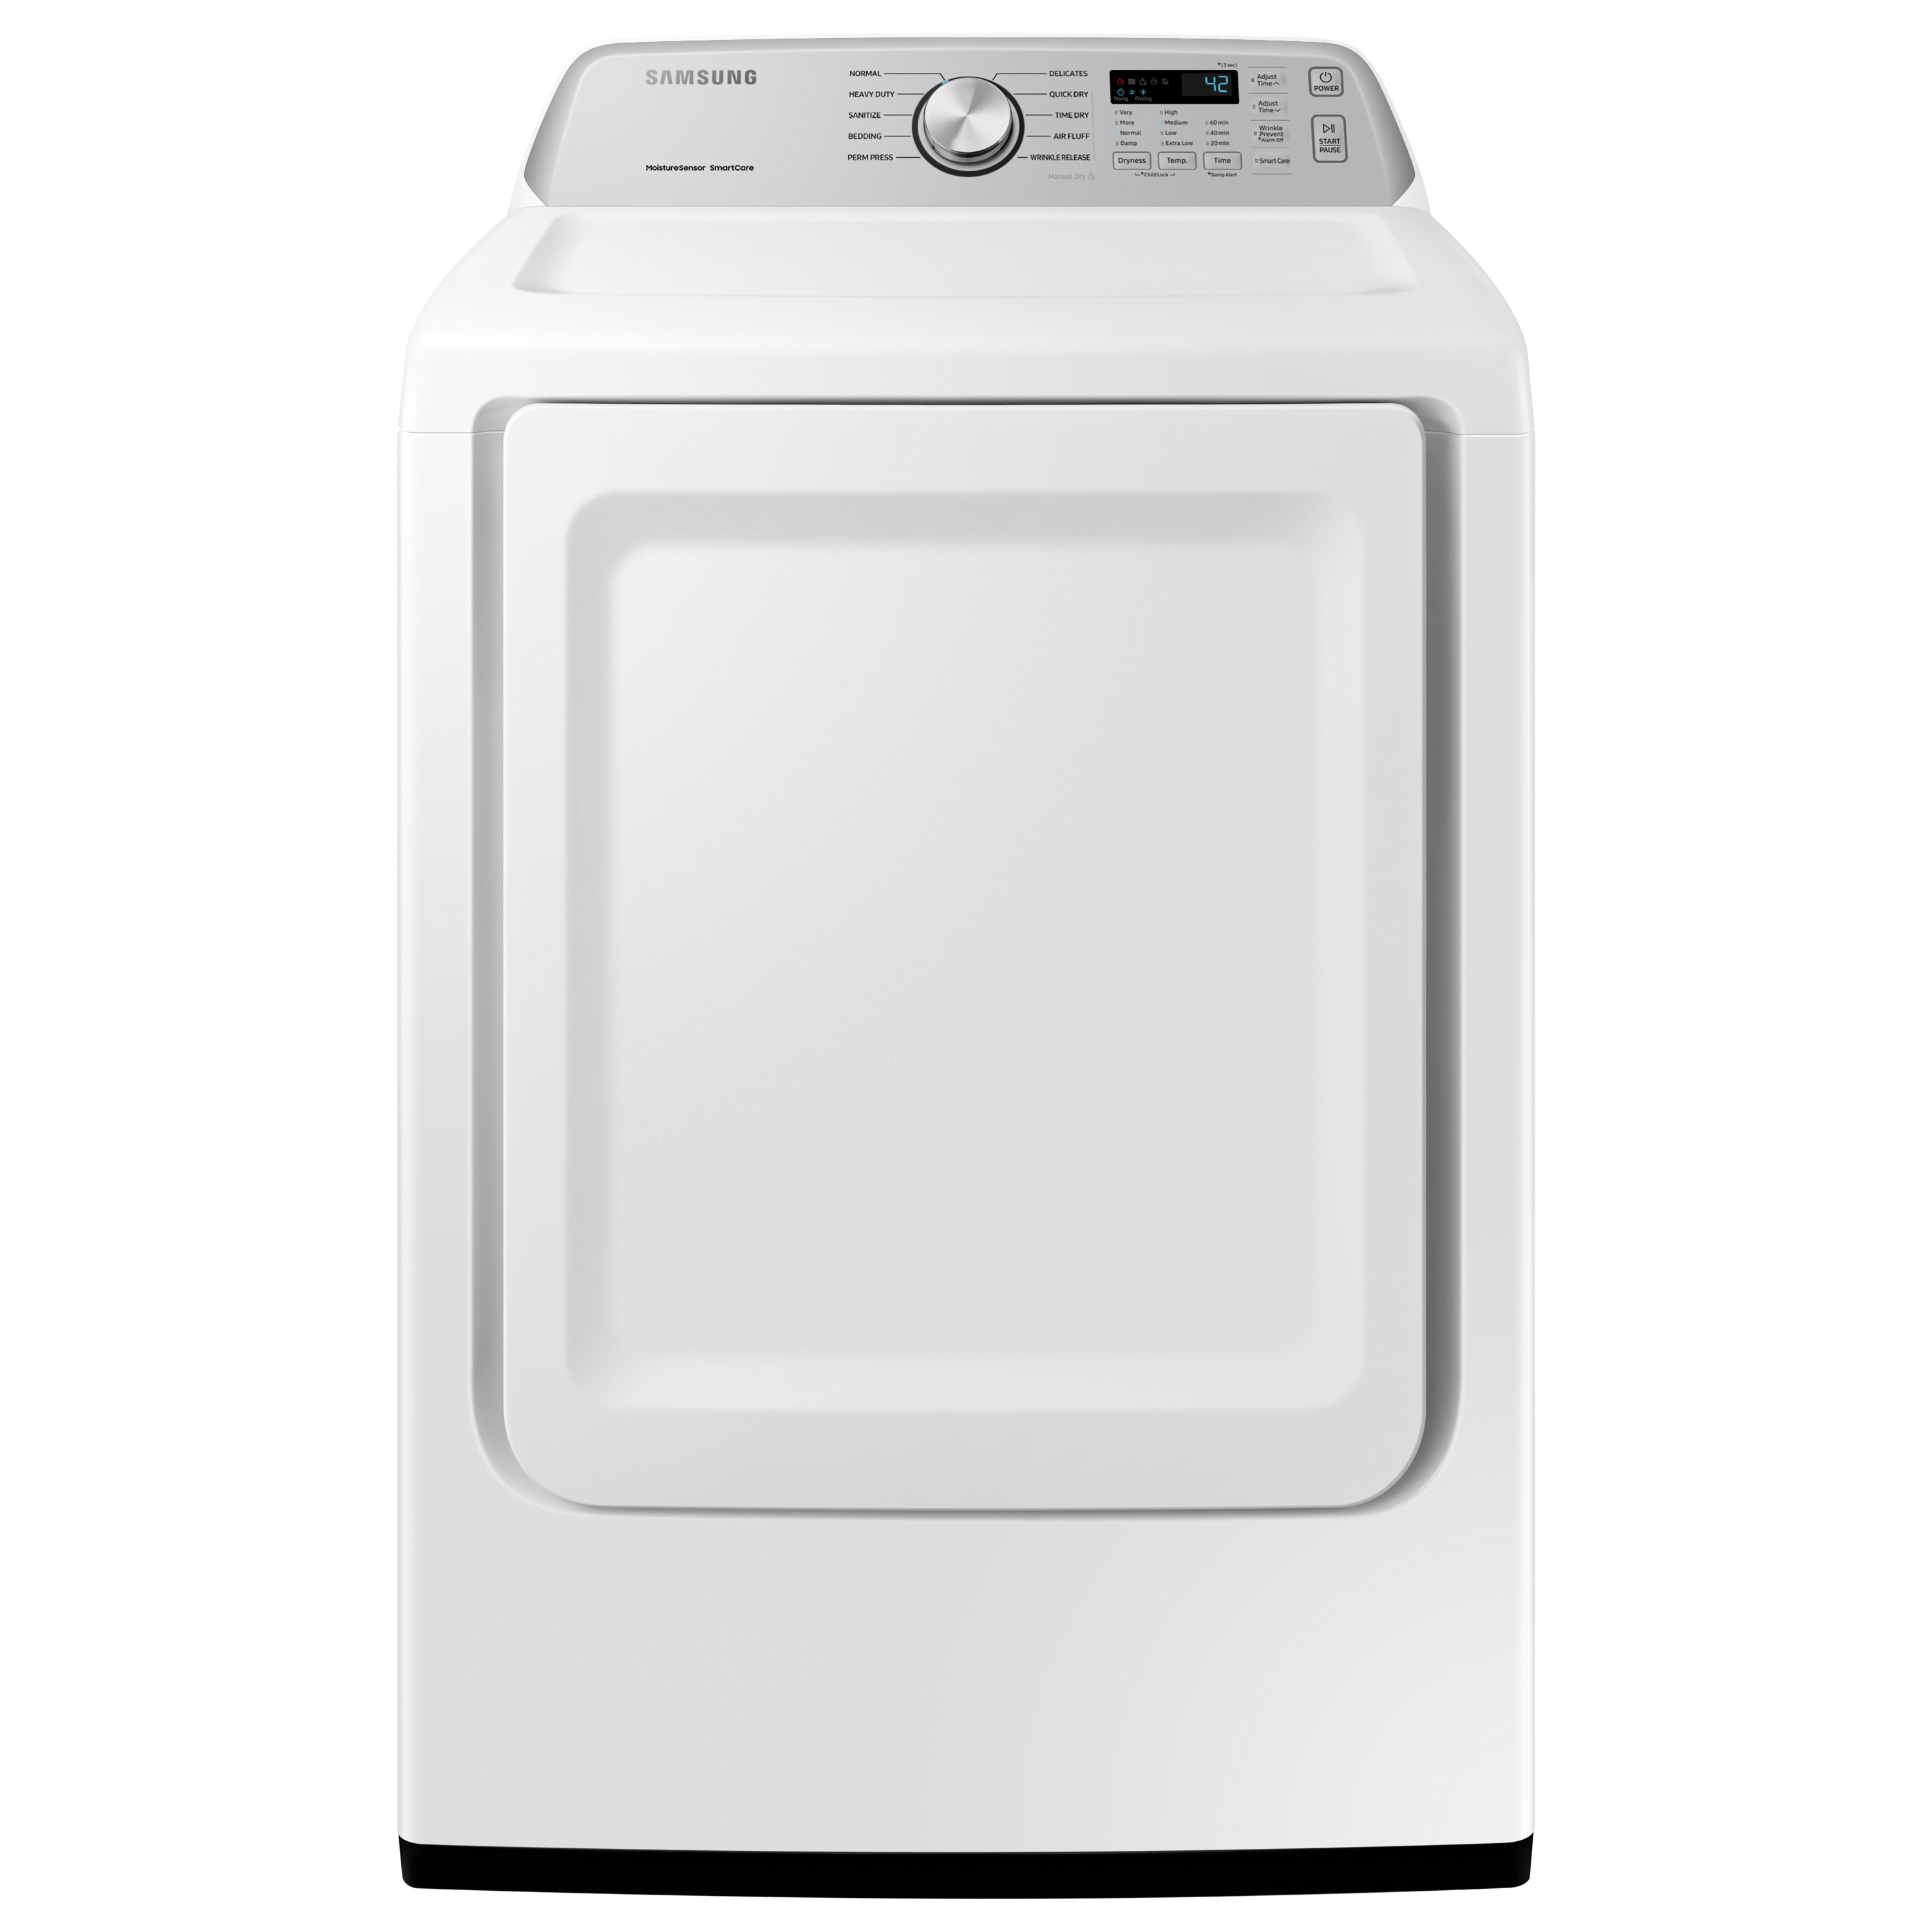 Samsung DVE45T3400W/A3 7.4cu.ft. Electric Dryer with Sensor Dry - White